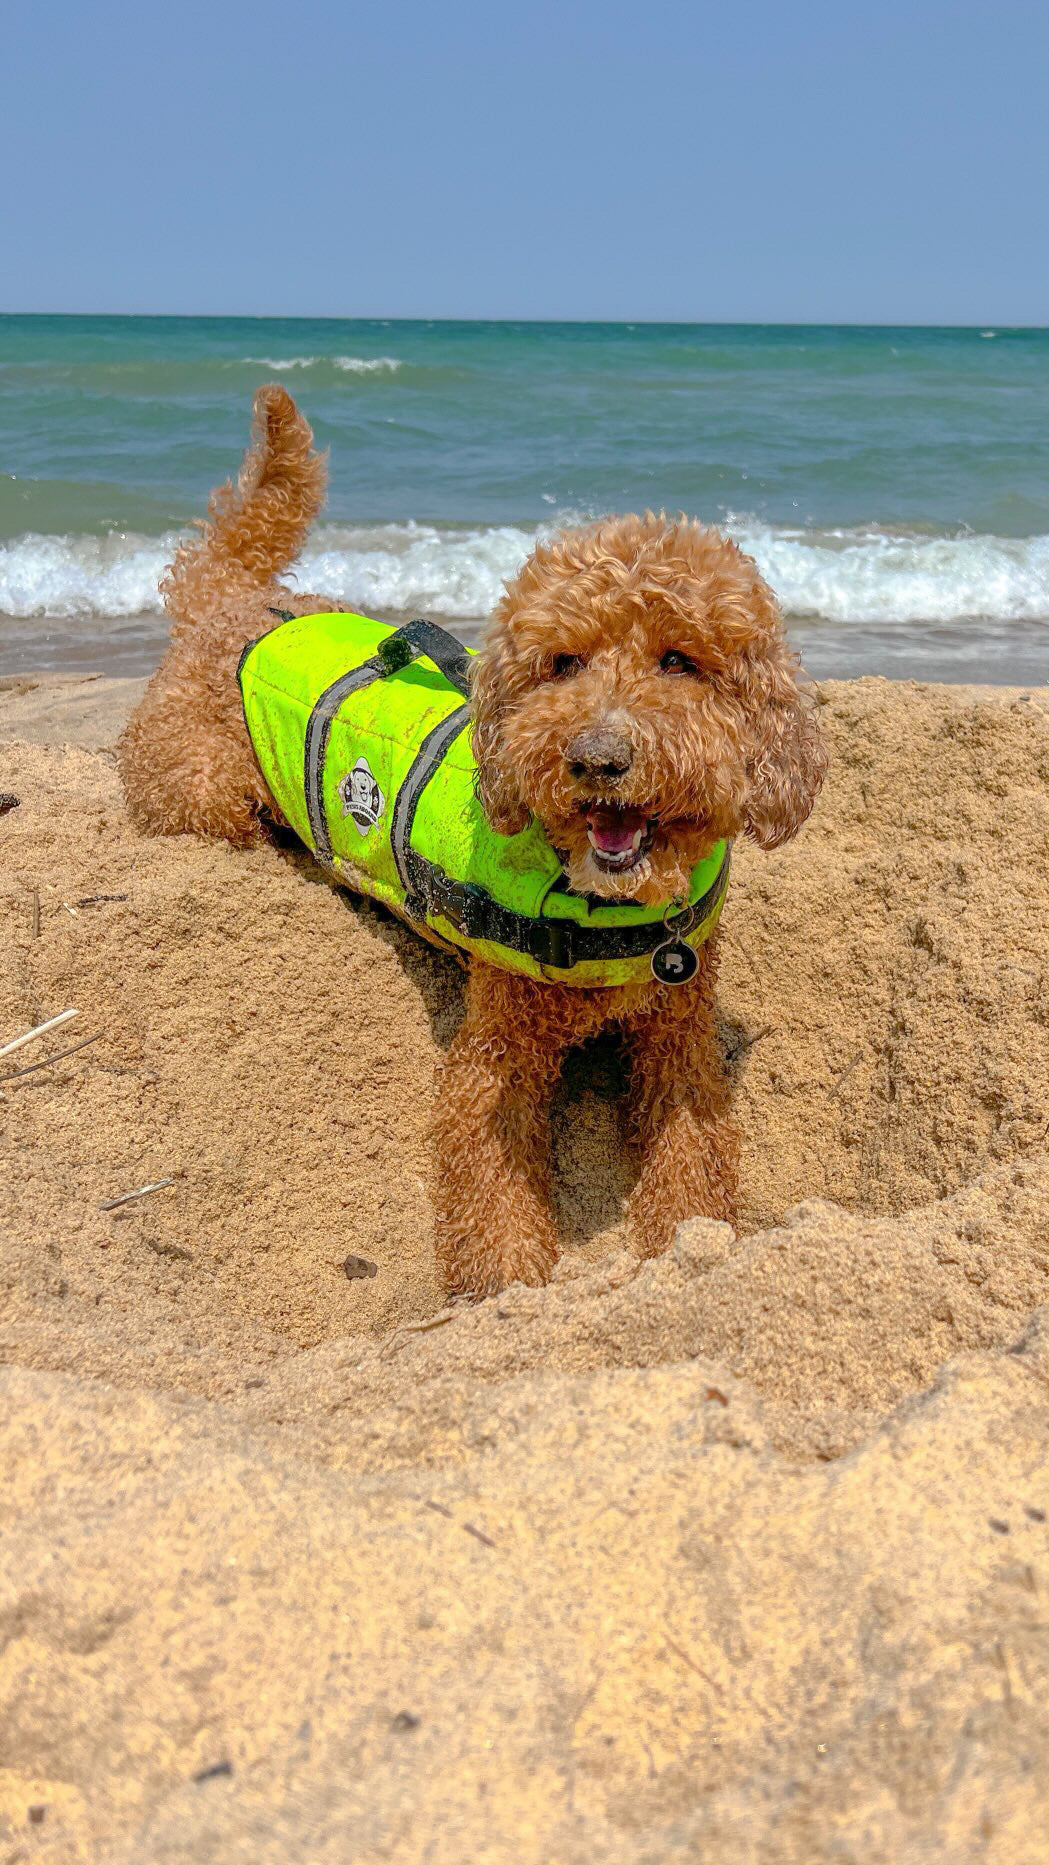 Golden doodle dog playing on sandy beach wearing a Safety yellow dog life jacket with breathable mesh underbelly, reflective straps for high visibility, leash clip, and a top handle. Featuring Paws Aboard logo.